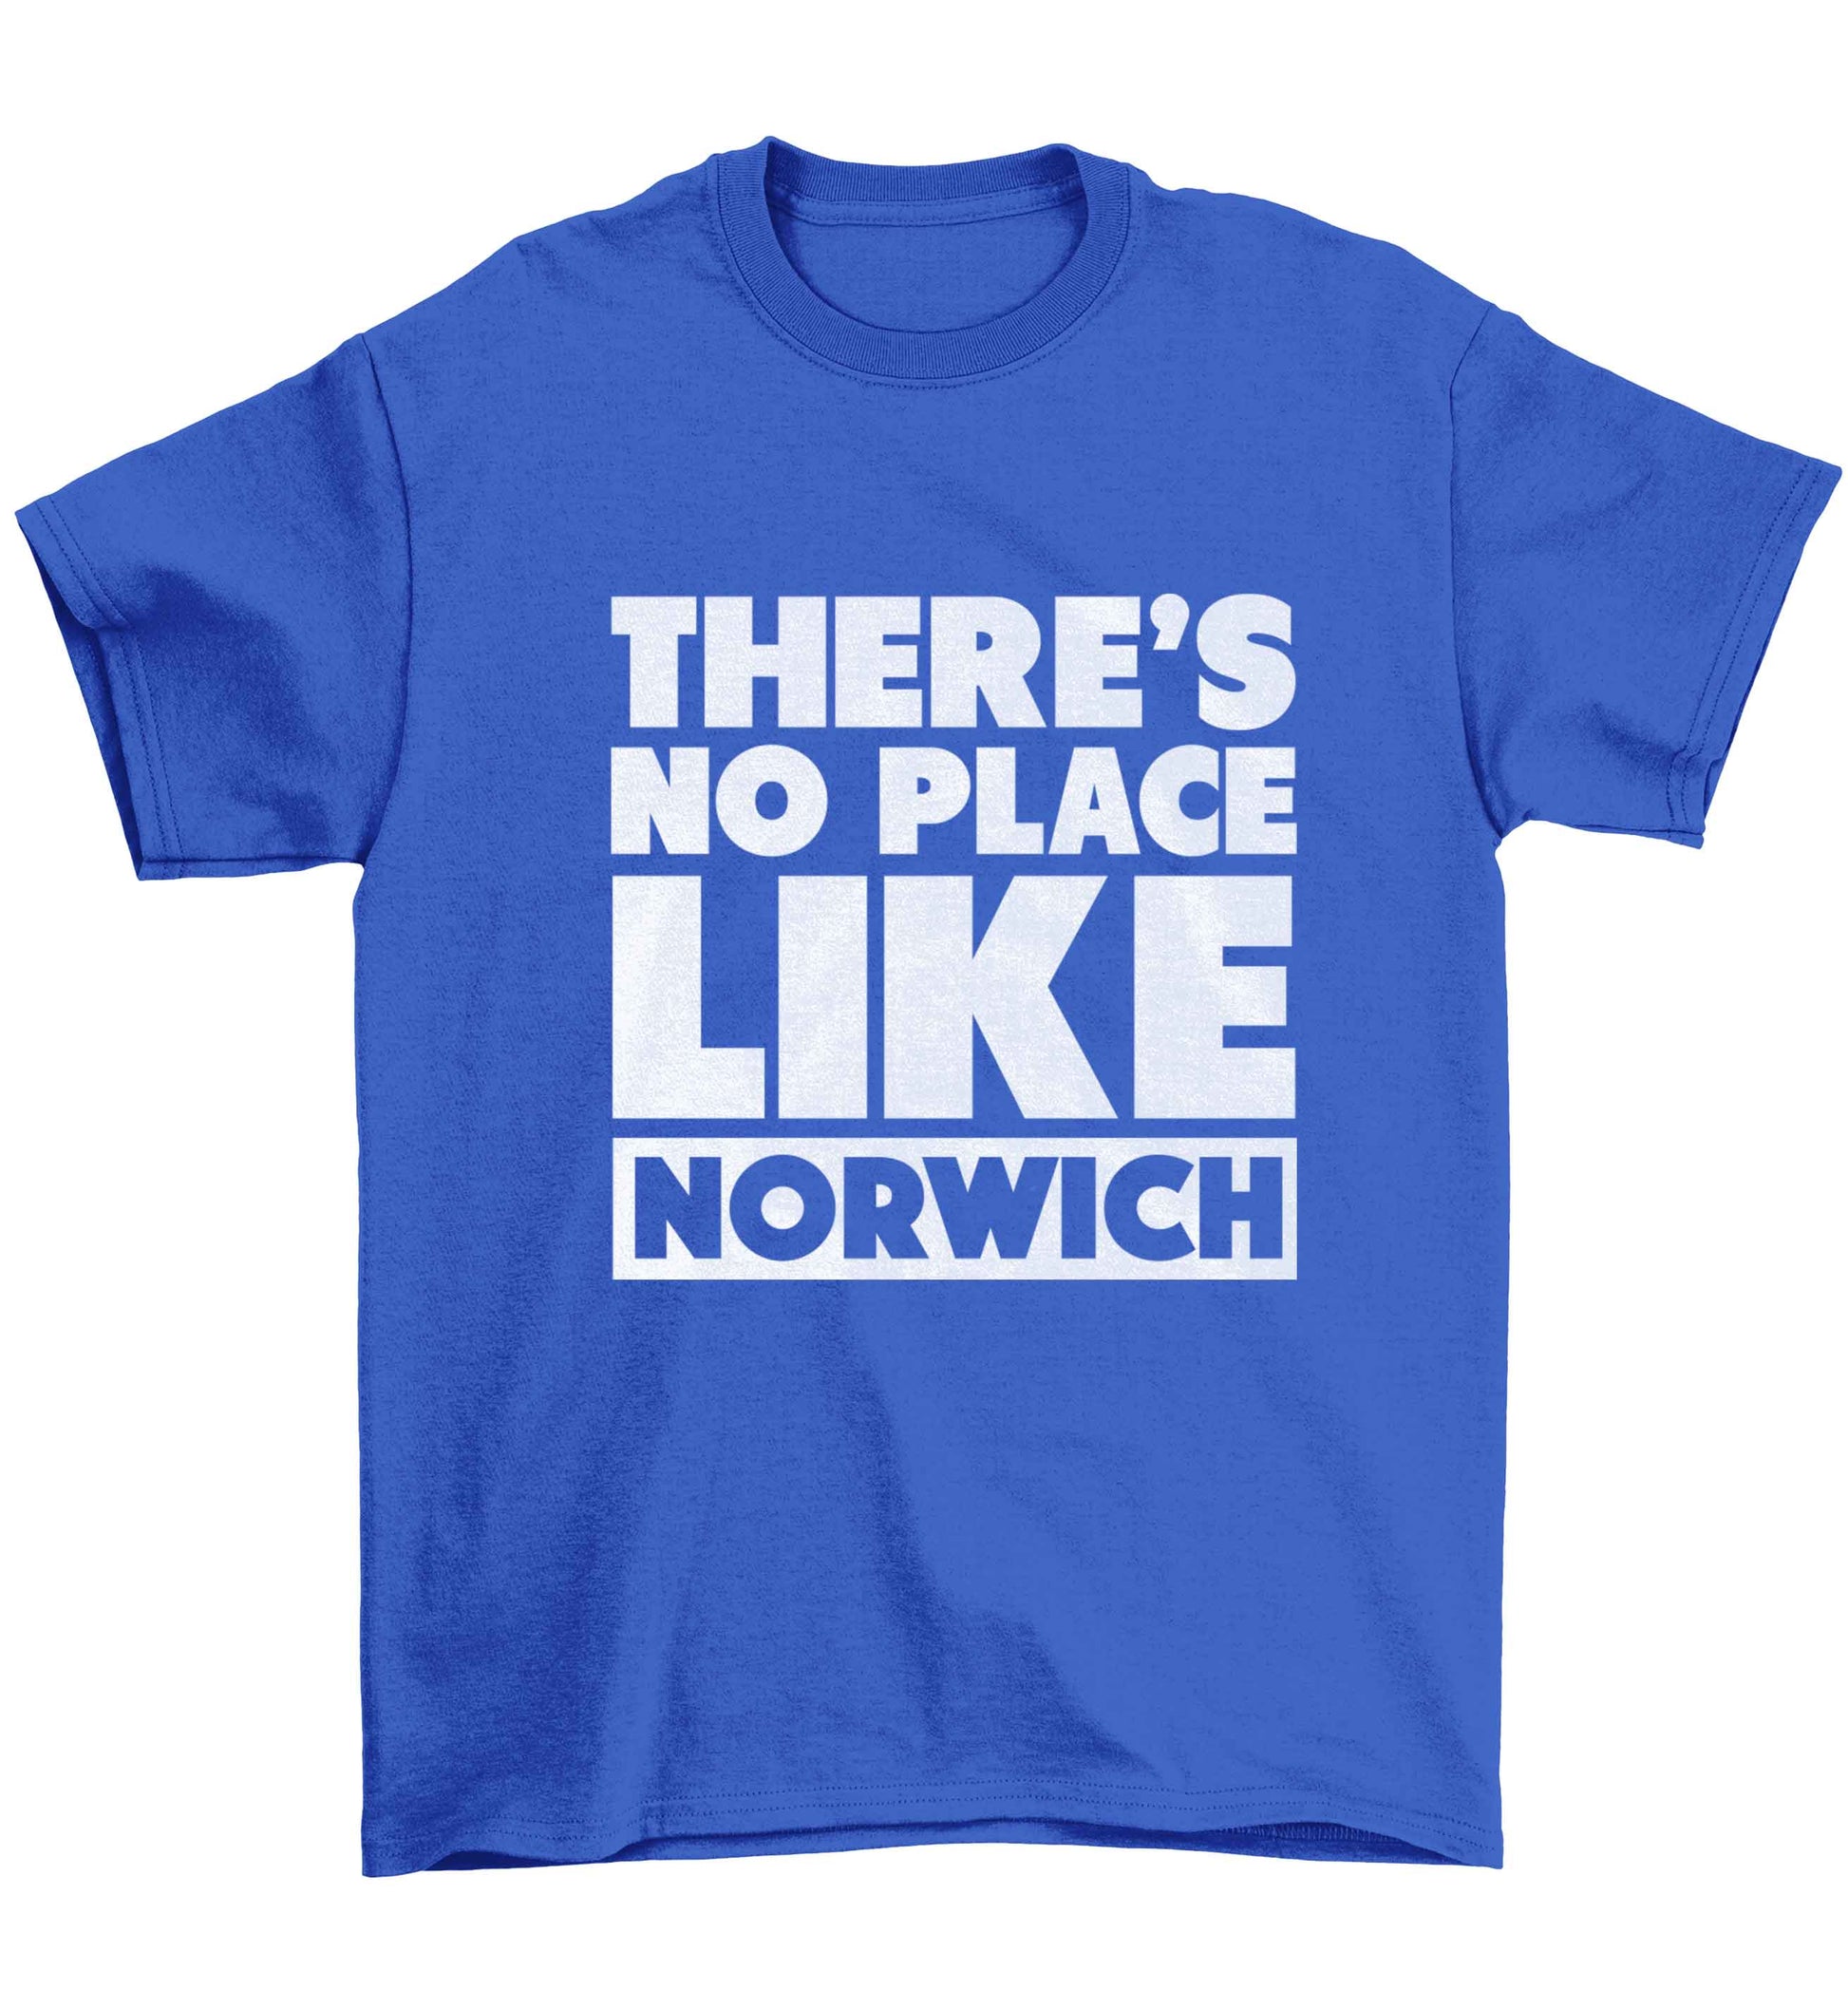 There's no place like Norwich Children's blue Tshirt 12-13 Years